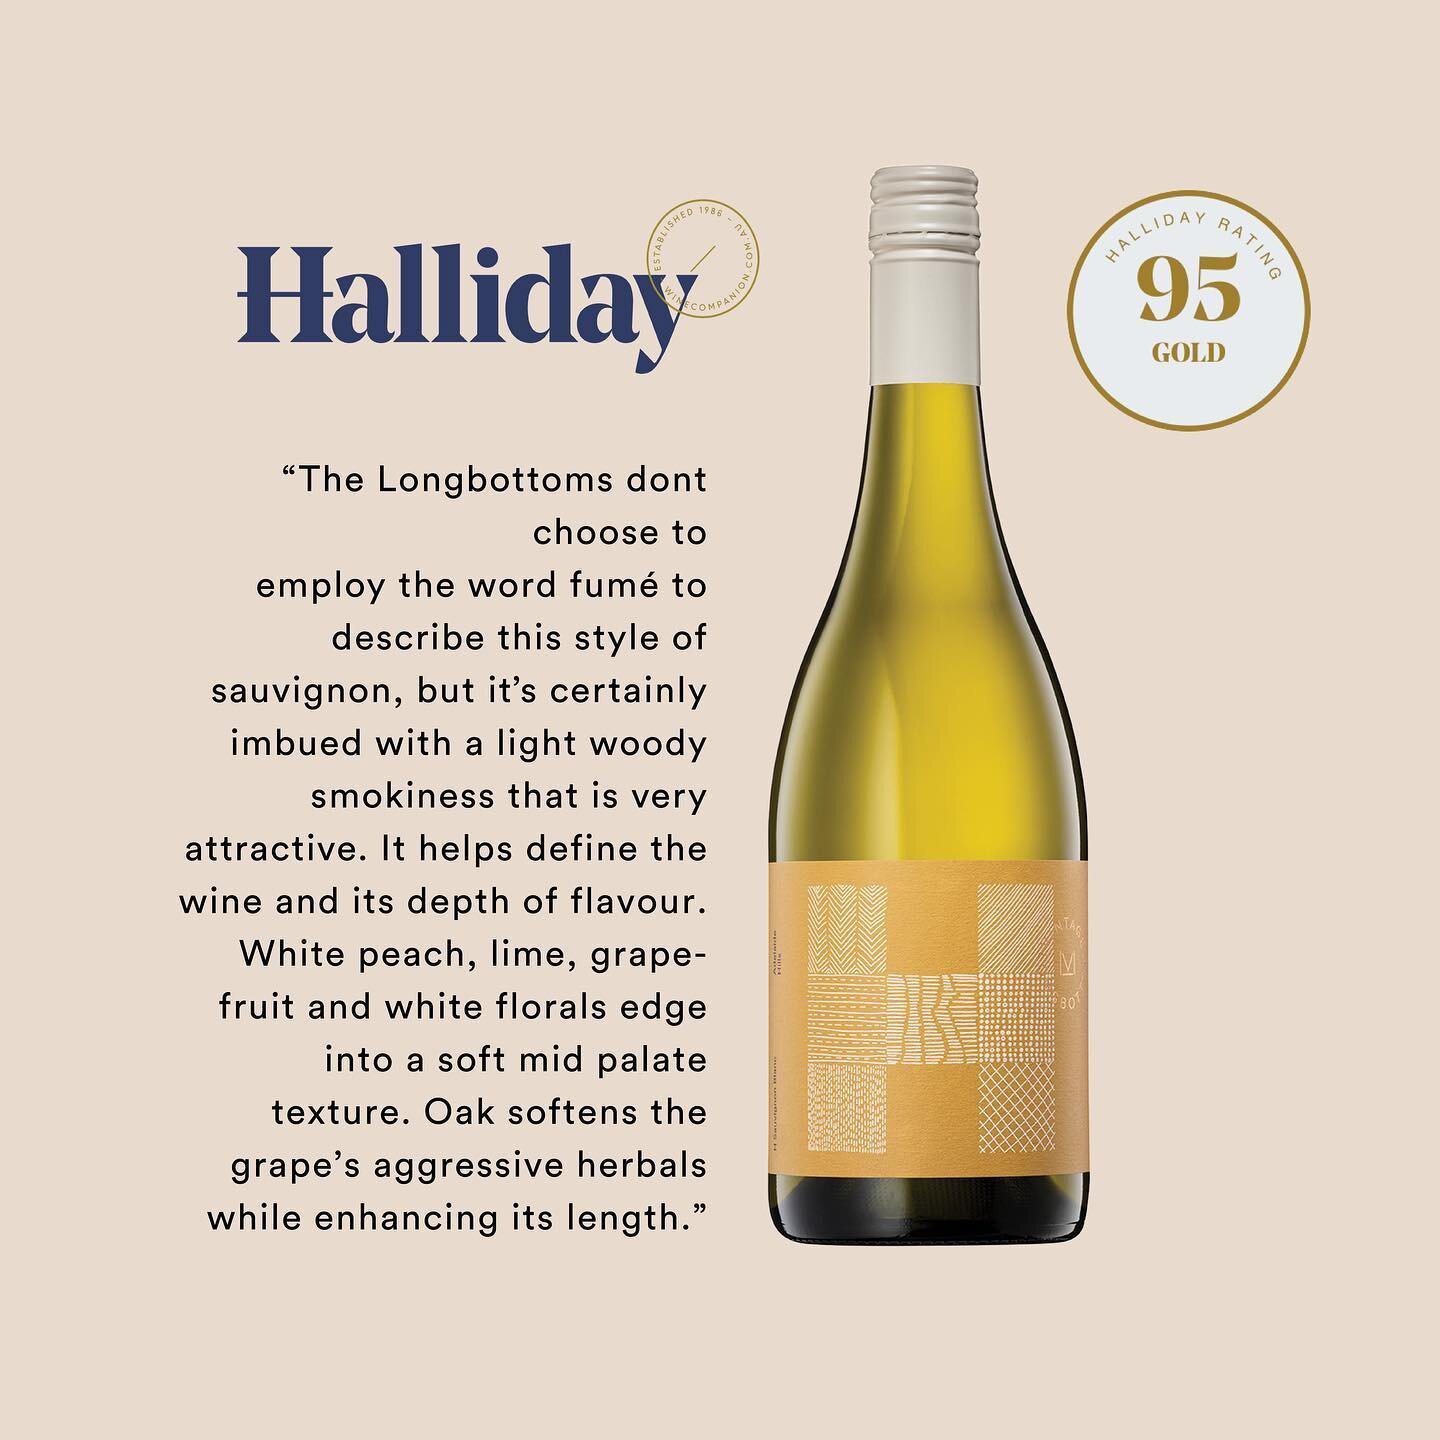 And now we just need the spring weather to enjoy this with! 🌞

#halliday #wine #wineaward #winecompanion #sauvignonblanc #adelaidehills